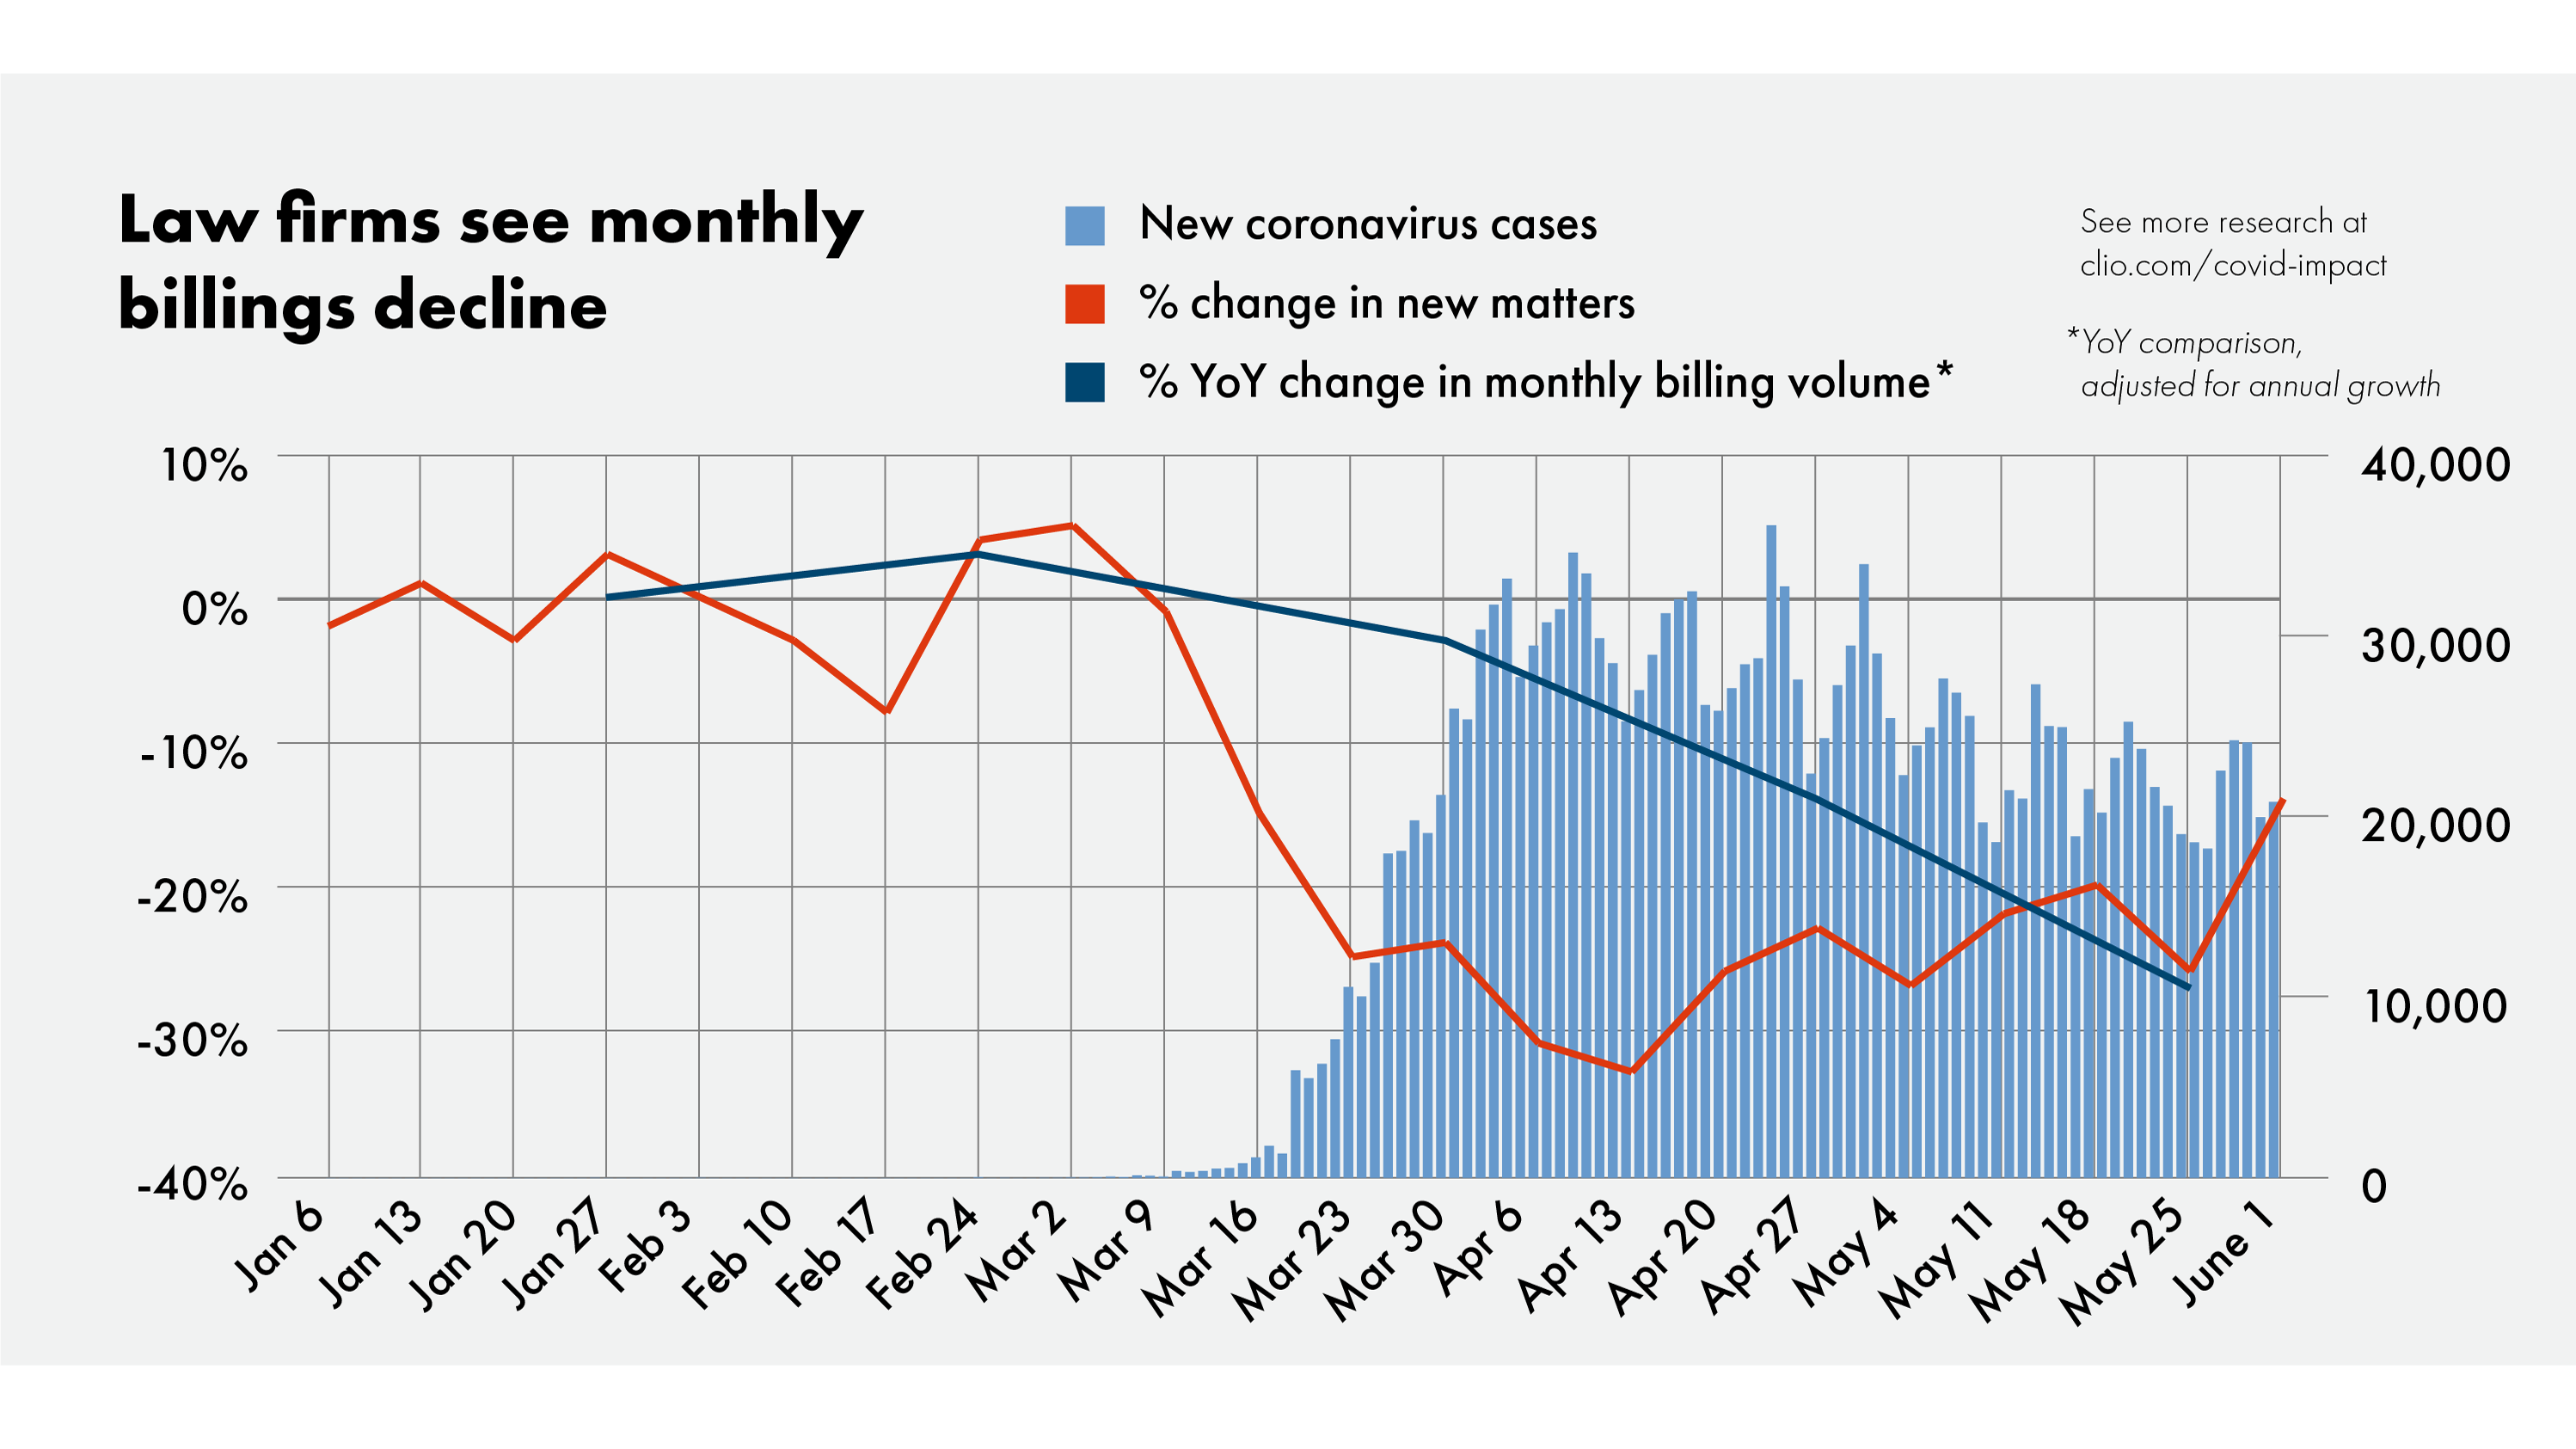 Post-Pandemic Drop in New Cases Sees Upturn, But Billing Volumes Fall, New Clio Data Shows